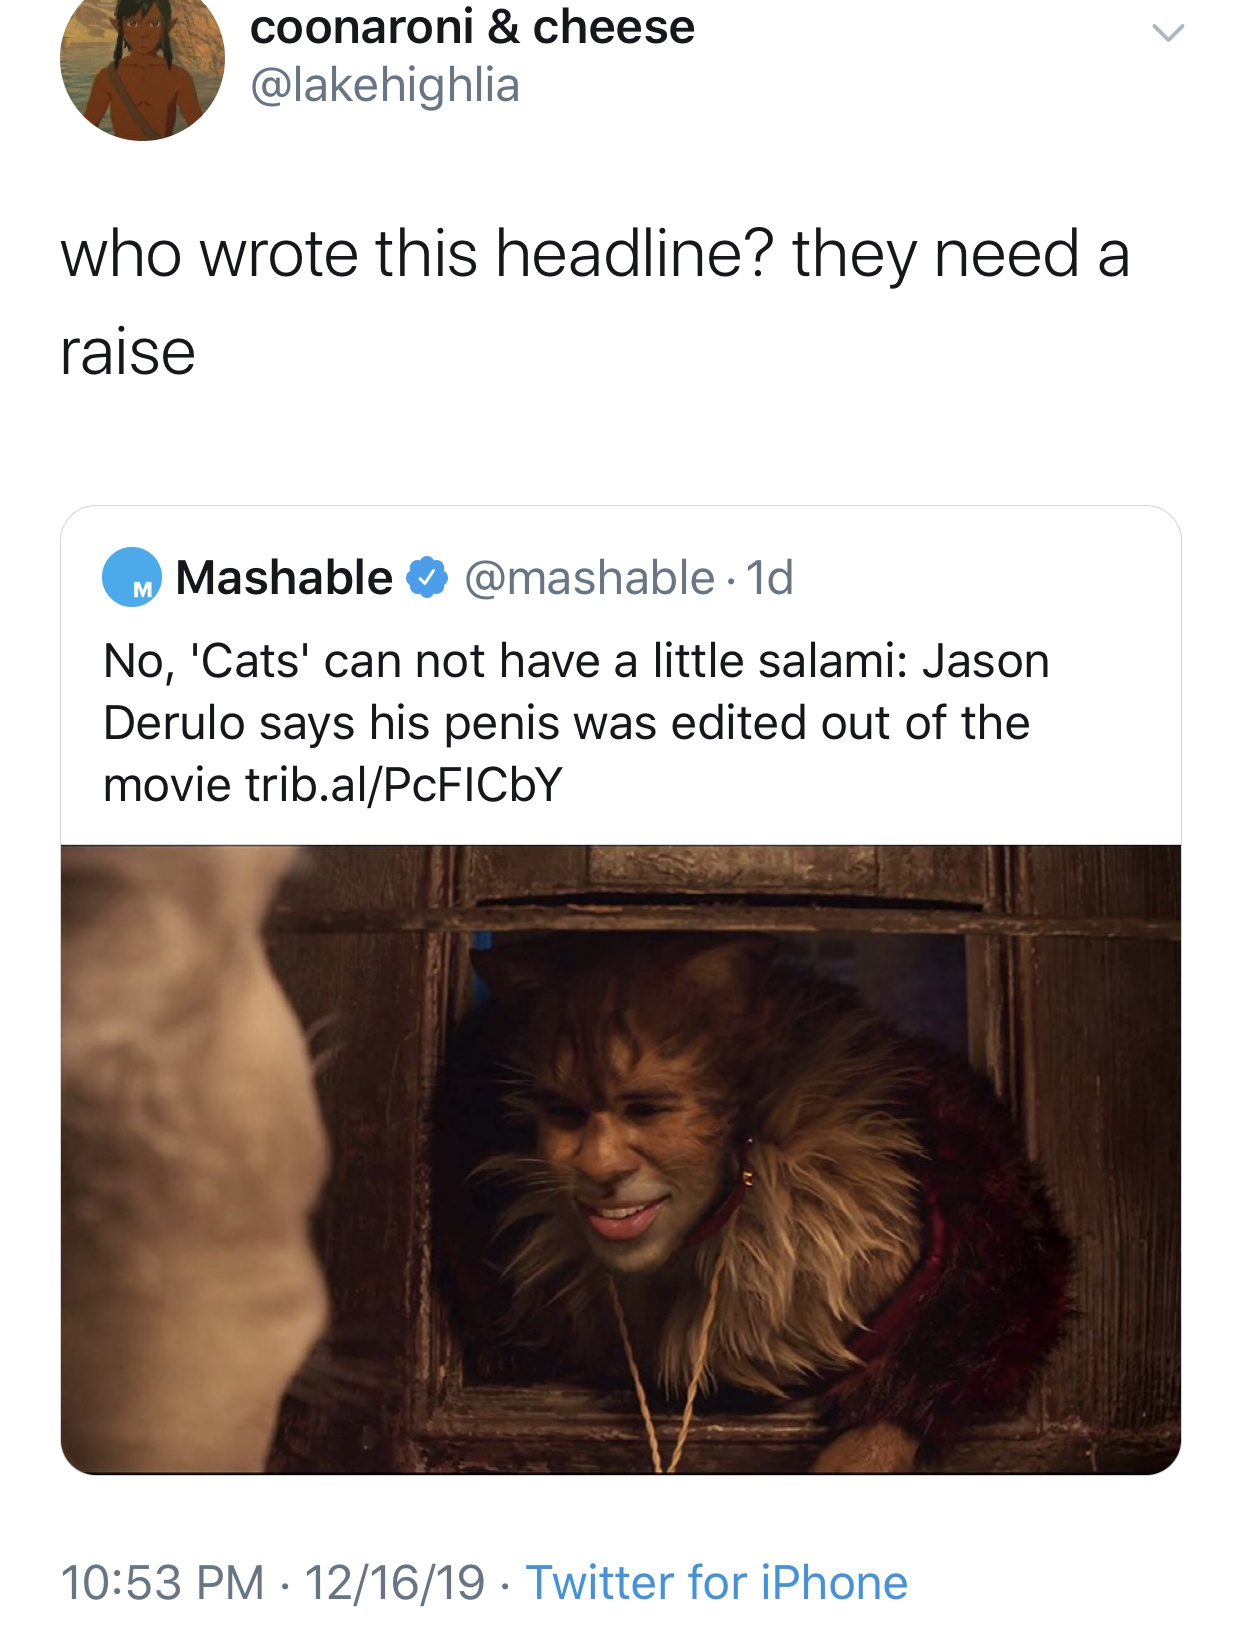 photo caption - coonaroni & cheese who wrote this headline? they need a raise Mashable . 1d No, 'Cats' can not have a little salami Jason Derulo says his penis was edited out of the movie trib.alPCFICbY 121619 Twitter for iPhone